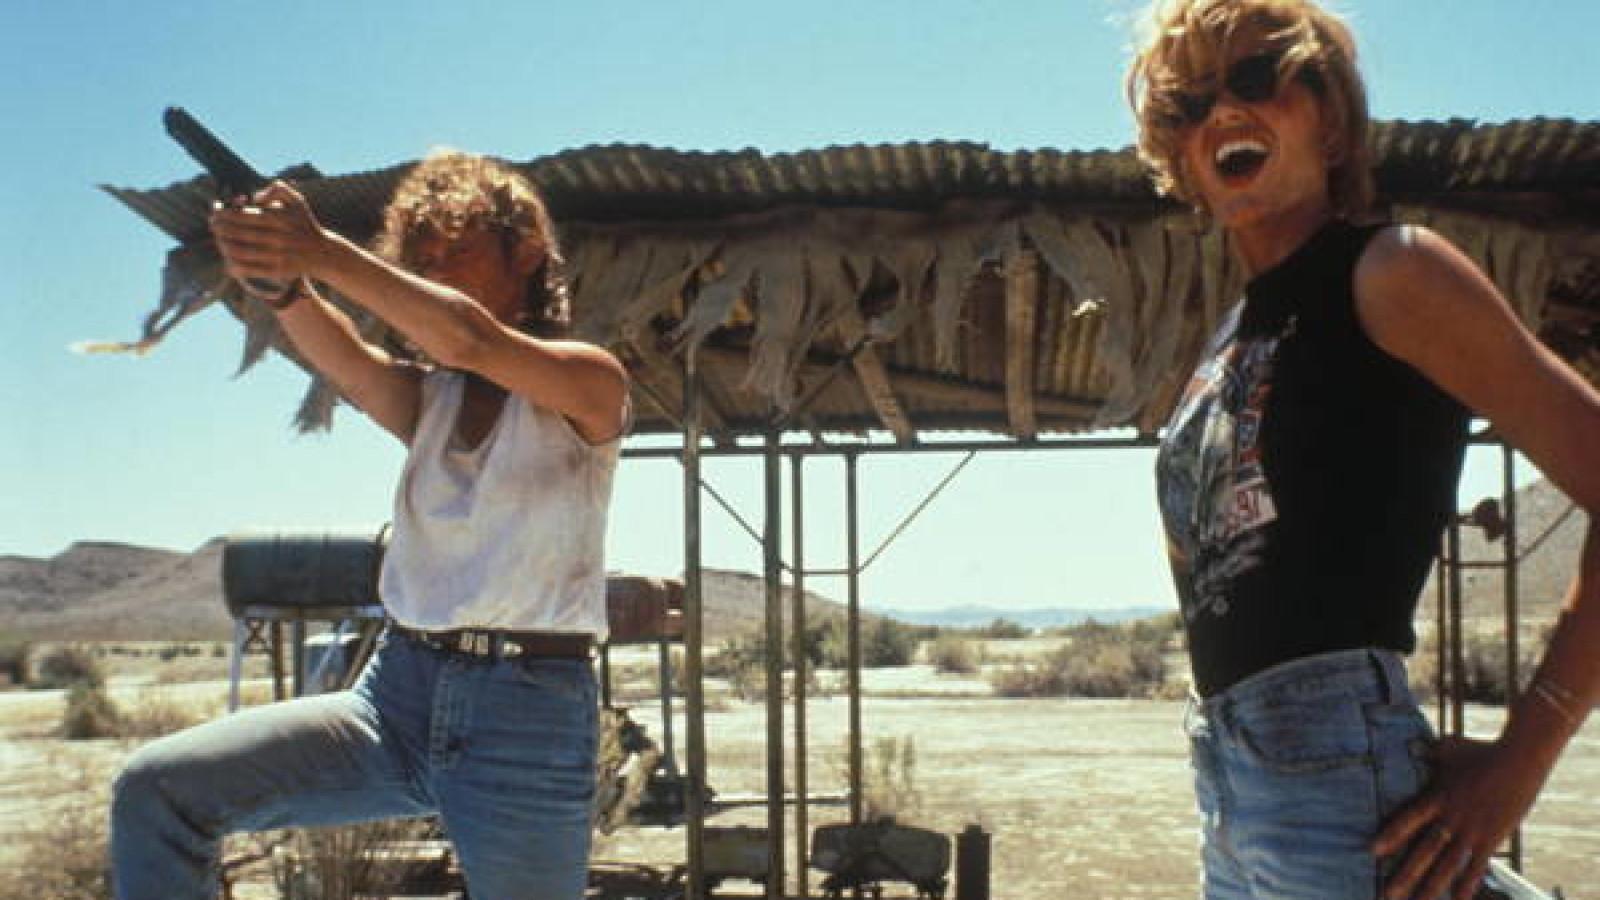 Thelma & Louise: 10 Behind-The-Scenes Facts About Ridley Scott's Movie